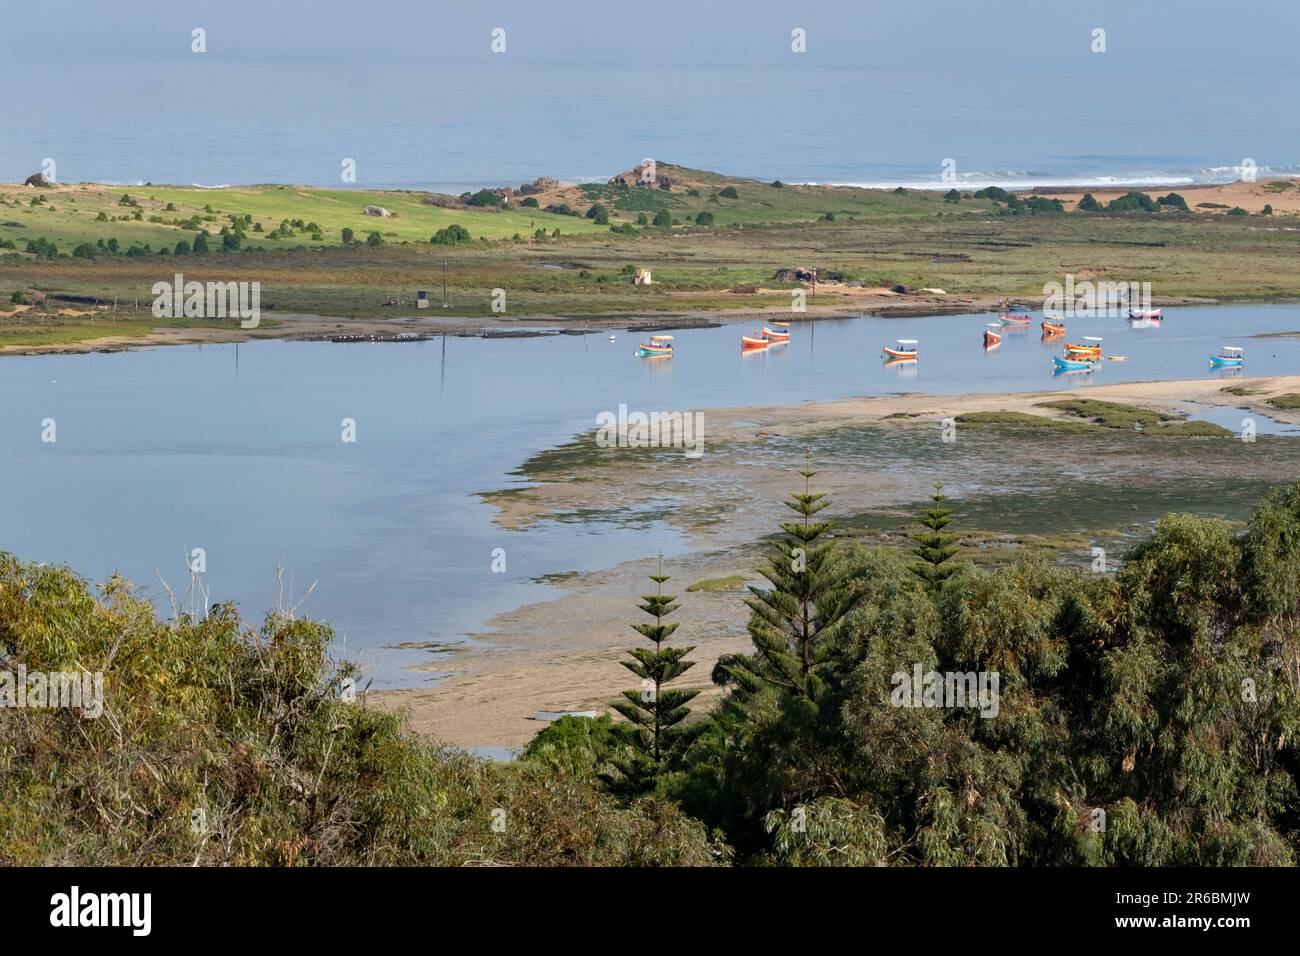 Boats moored in the lagoon at the Sidi Moussa-Oualidia RAMSAR protected wetlands near the town of Oualidia in Morocco Stock Photo